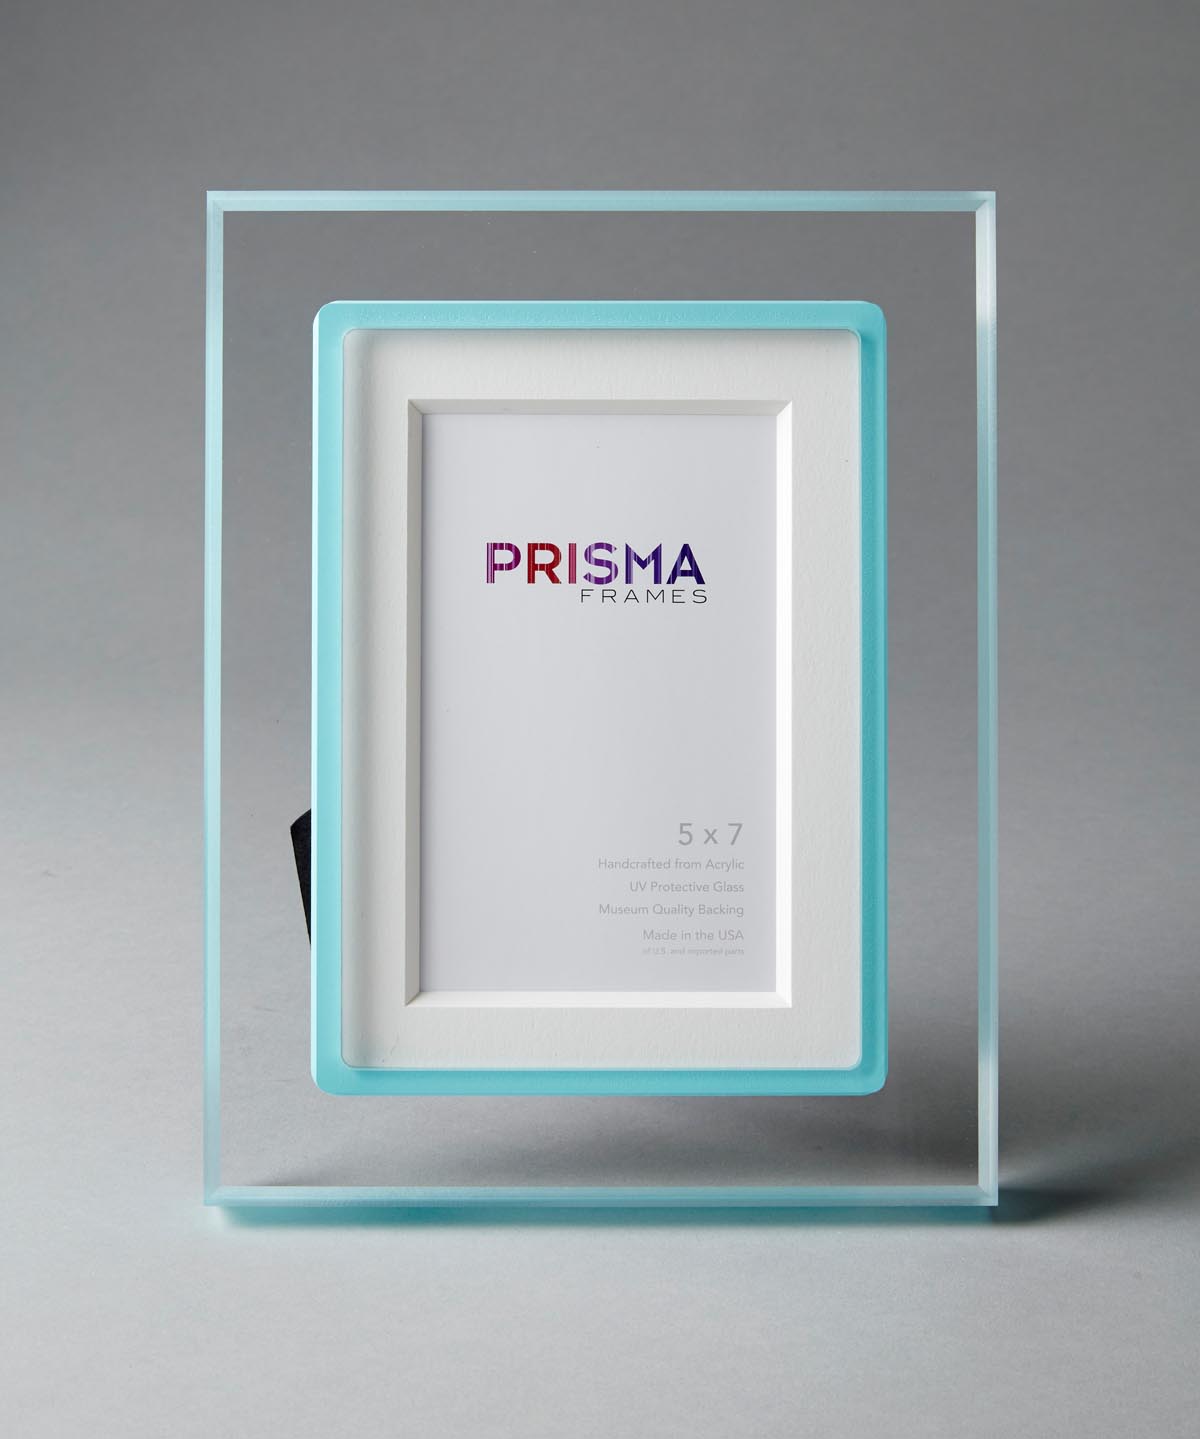 Circa island Prisma clear lucite frame - front view